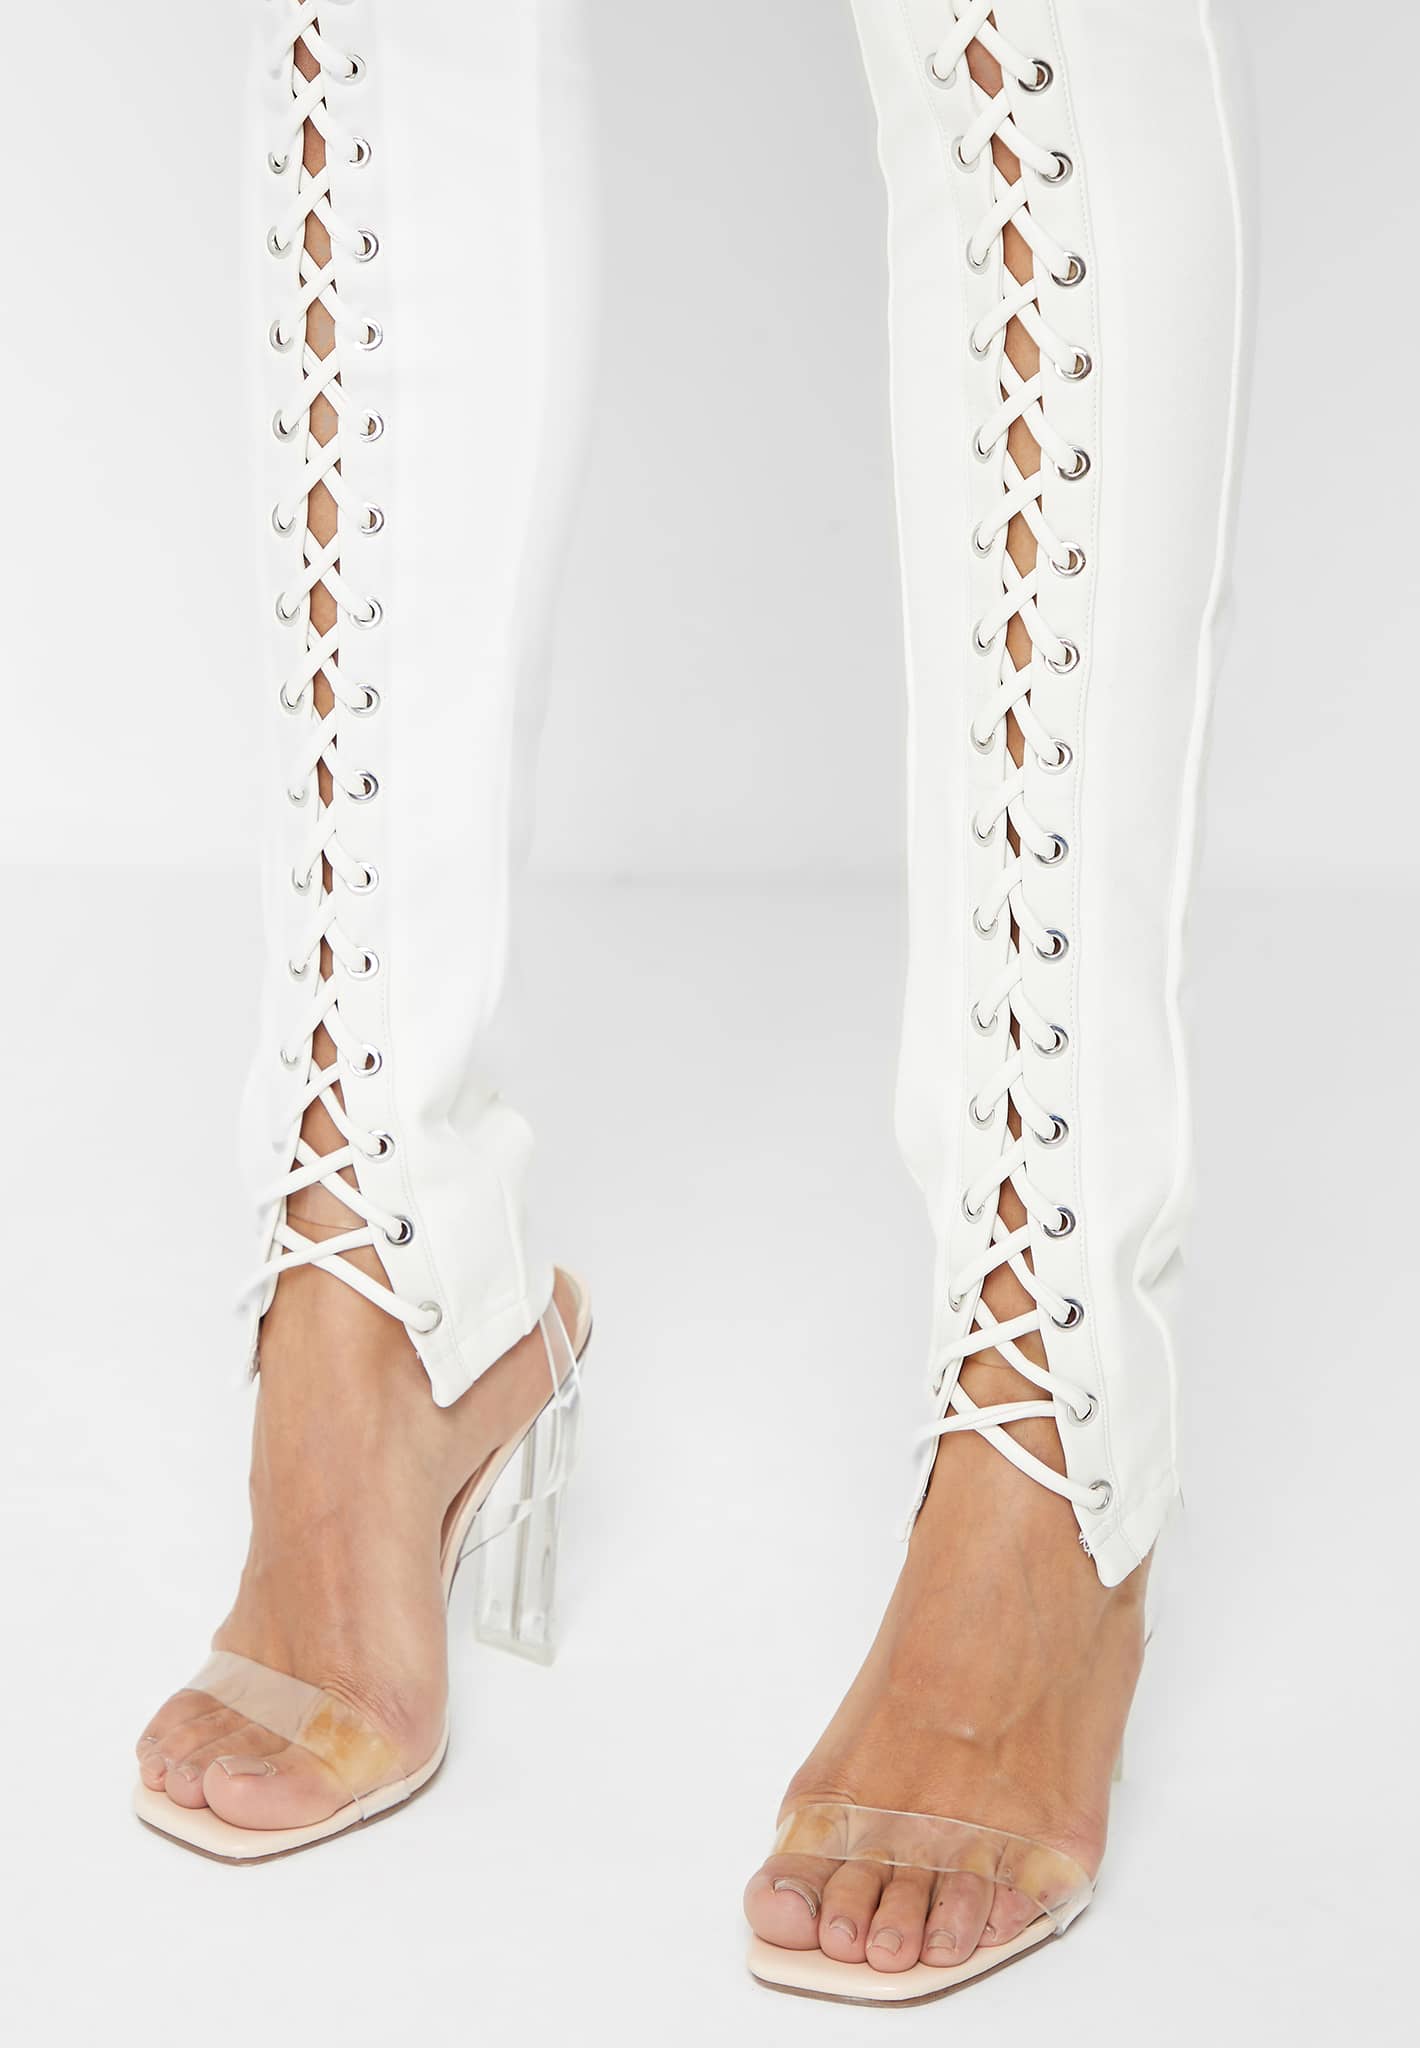 Lace Up Leggings with Corset Detail - White